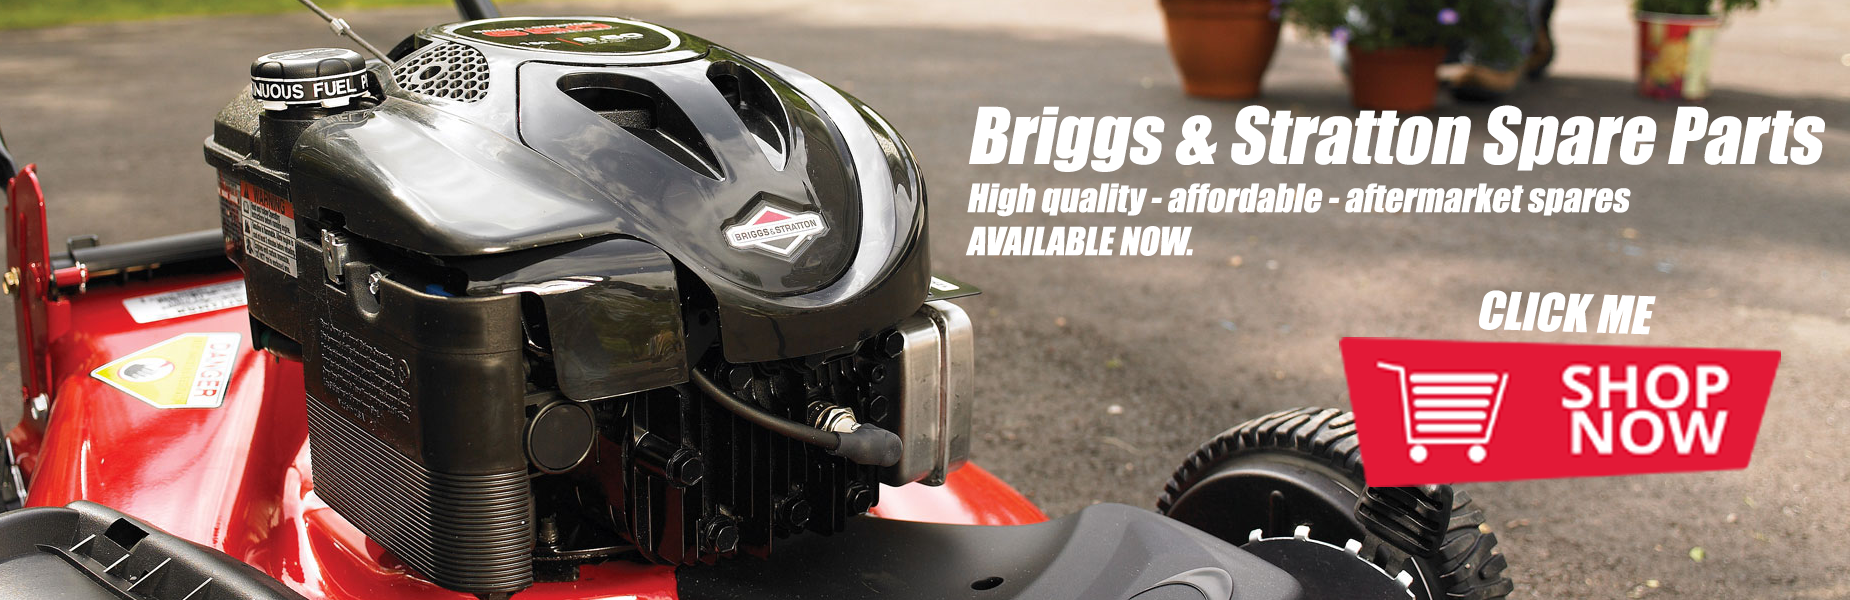 Briggs & Stratton High Quality - Affordable - Aftermarket spares online with Australia wide shipping.